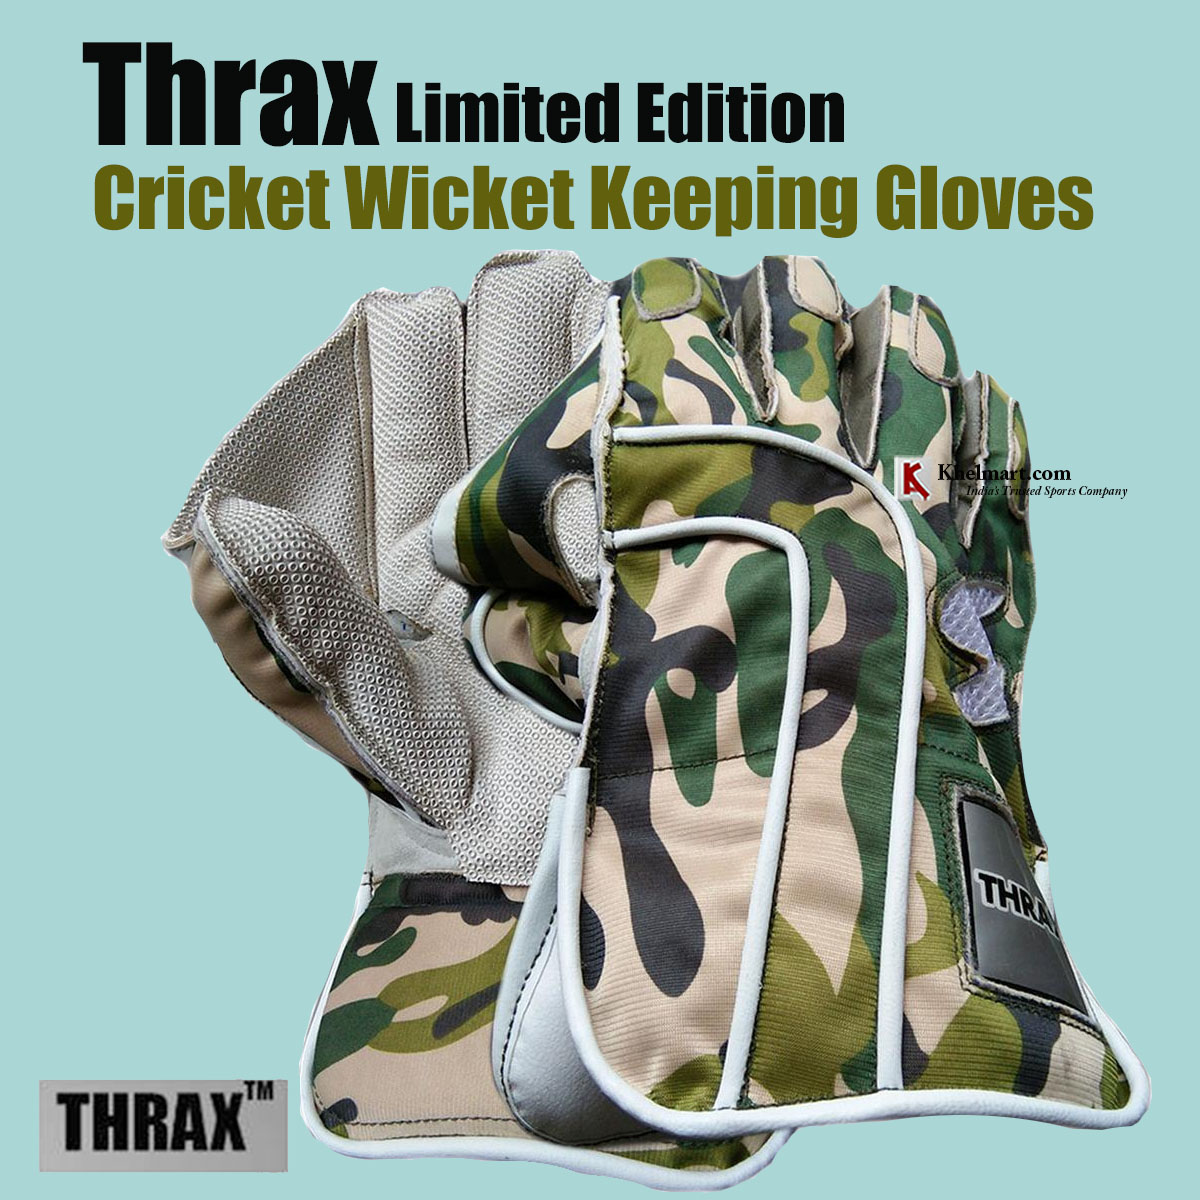 Thrax_Limited_Edition_Cricket_Wicket_Keeping_Gloves_3.jpg